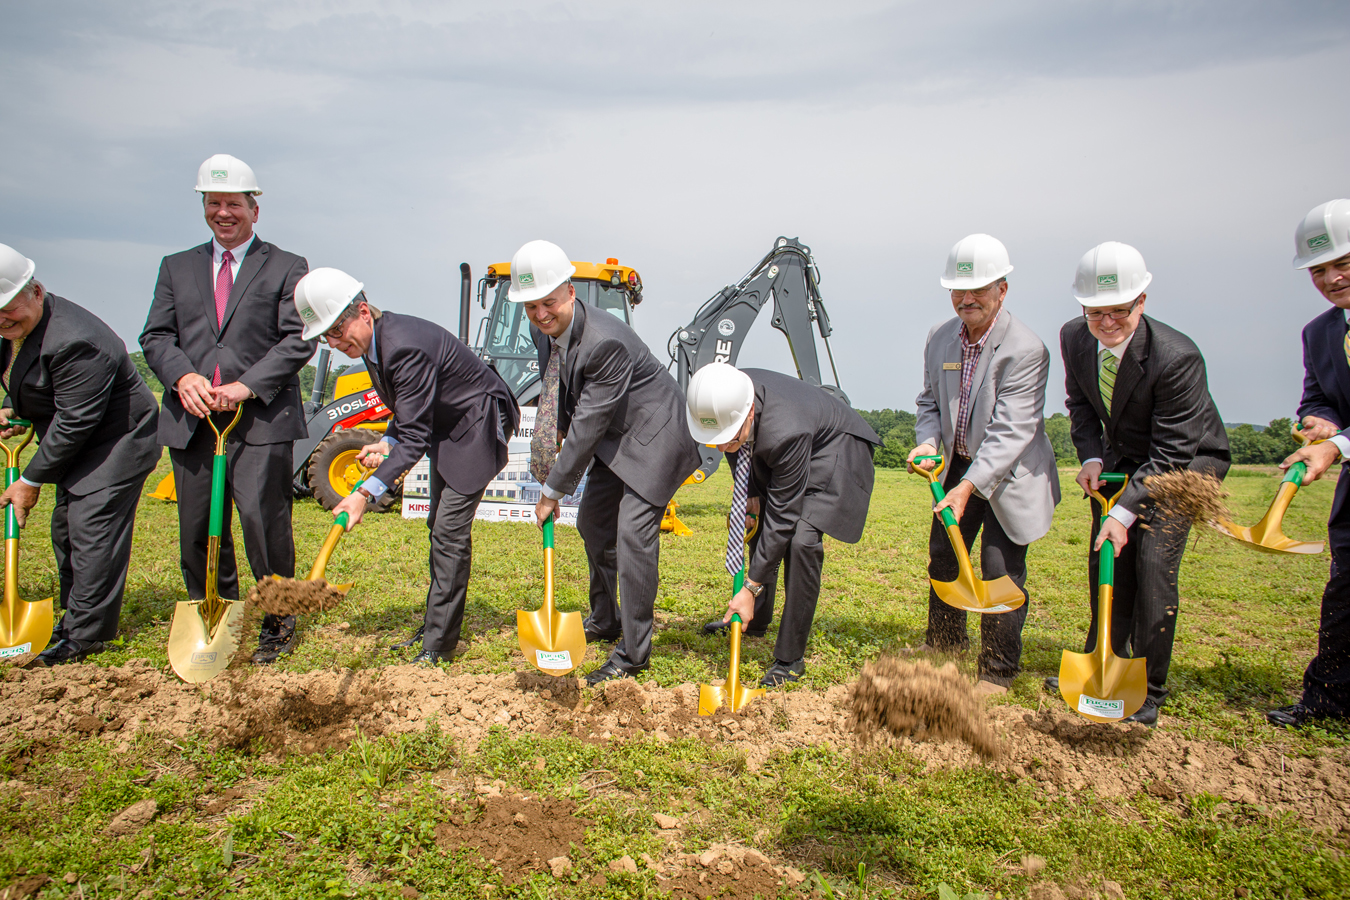 The groundbreaking ceremony for Fuchs North America’s new headquarters facilities was held on June 23, 2015.